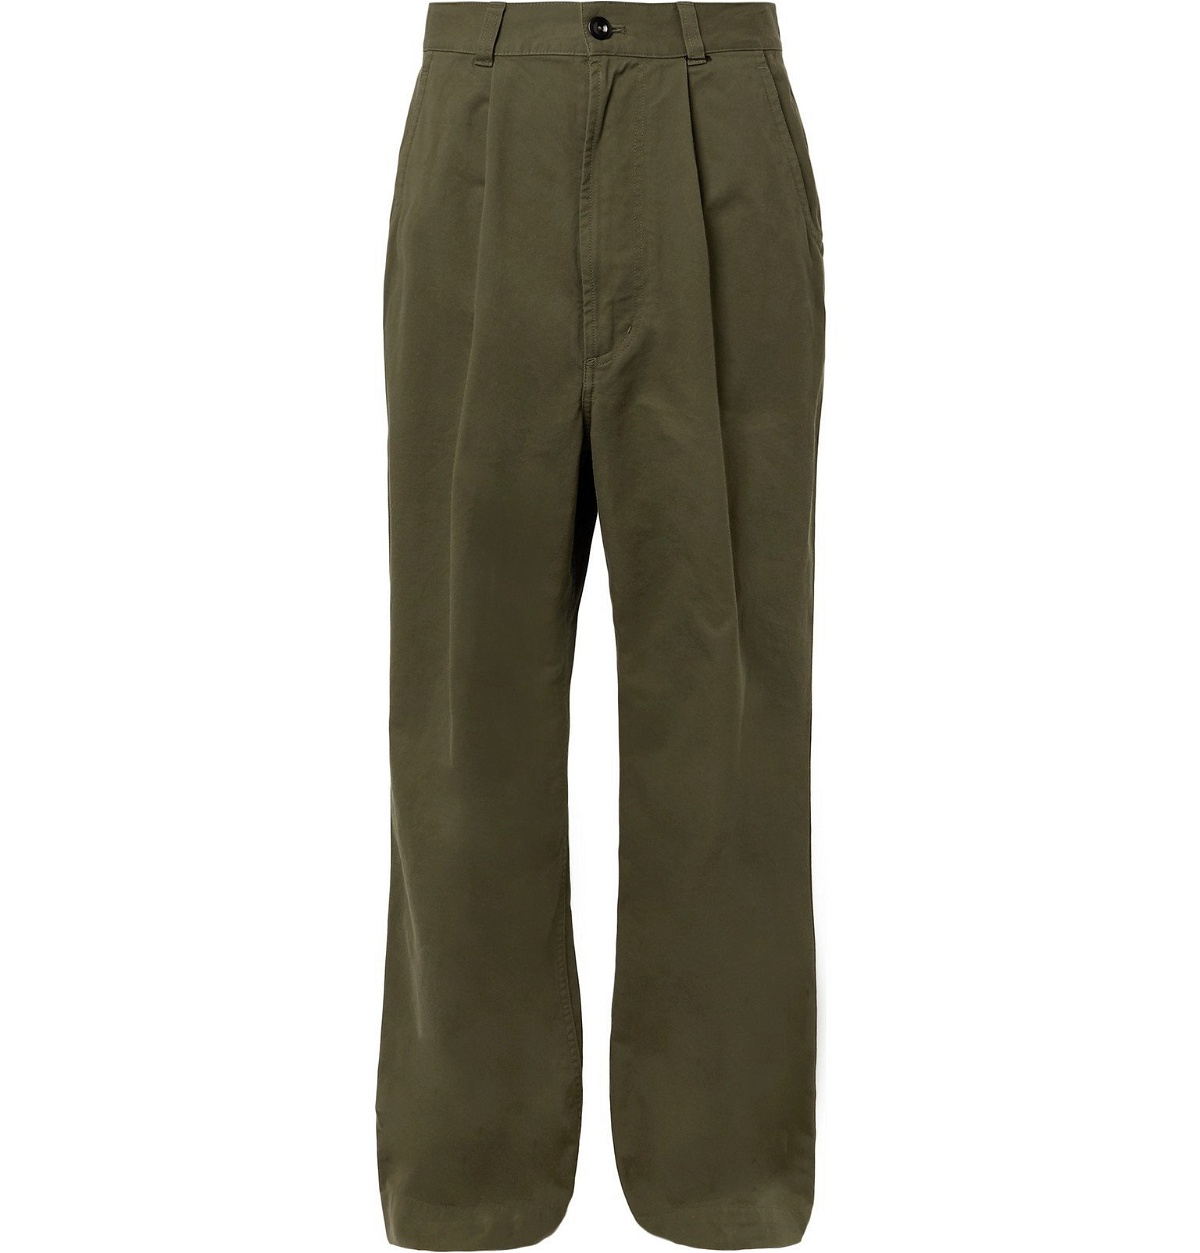 Margaret Howell - MHL Pleated Cotton-Drill Trousers - Green